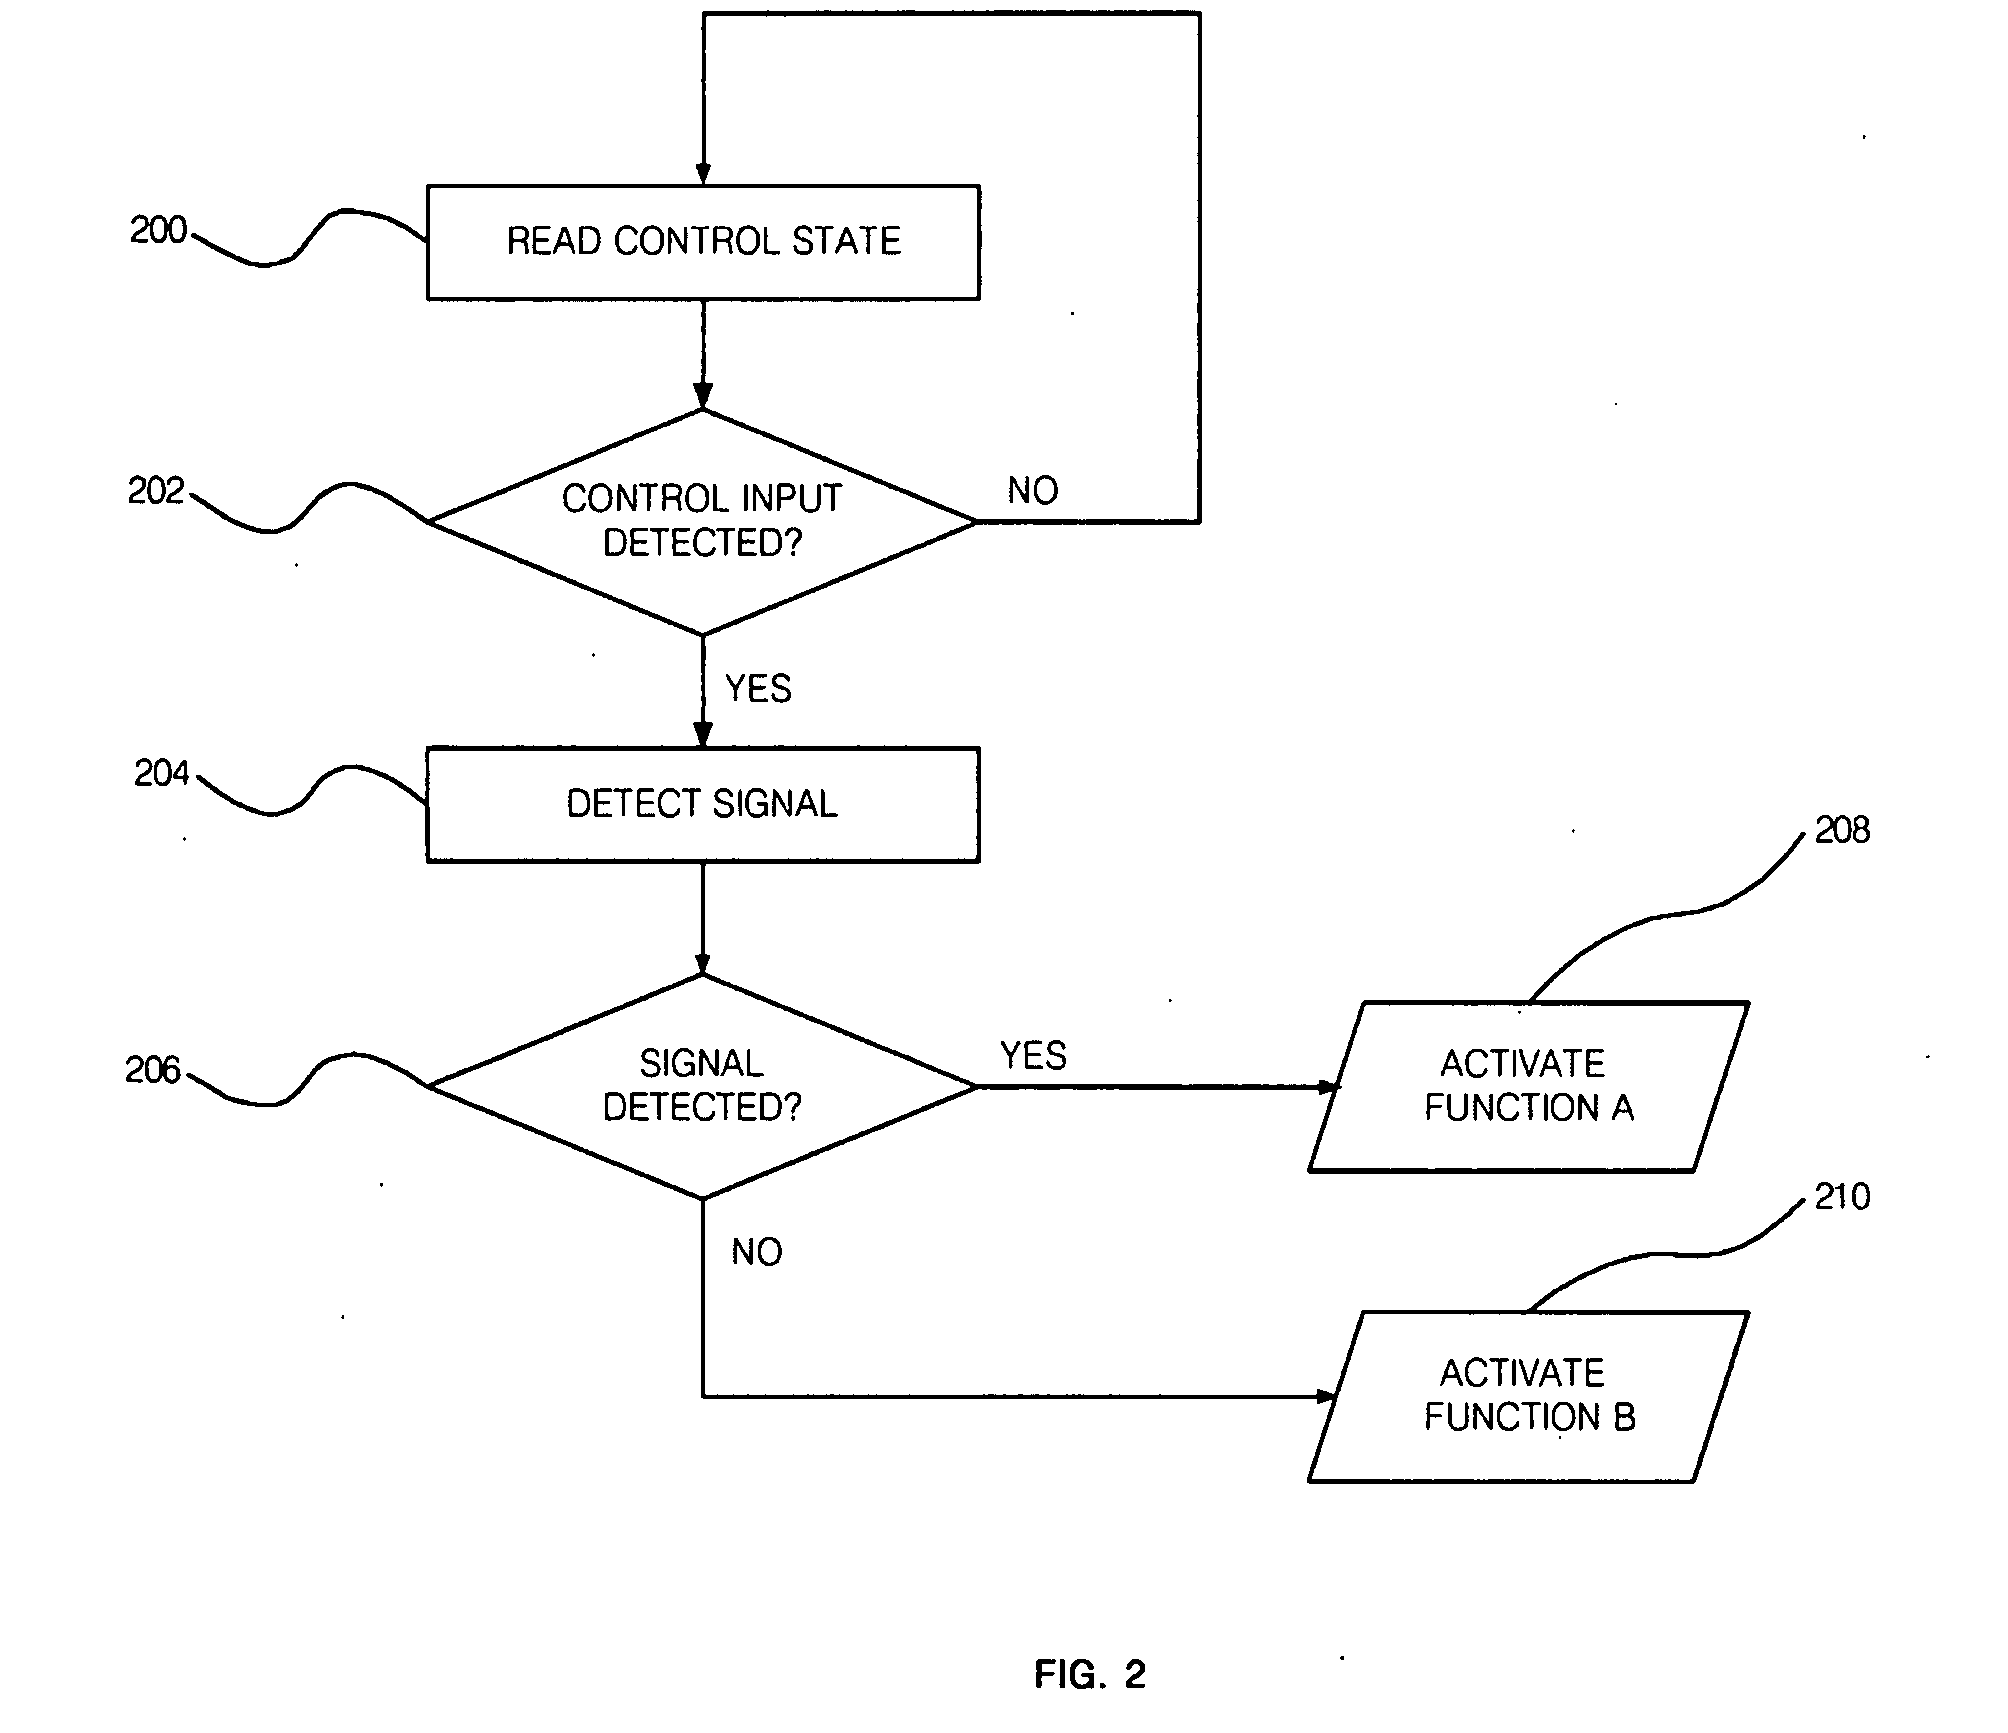 Method for attributing equipment operation to a specific operator